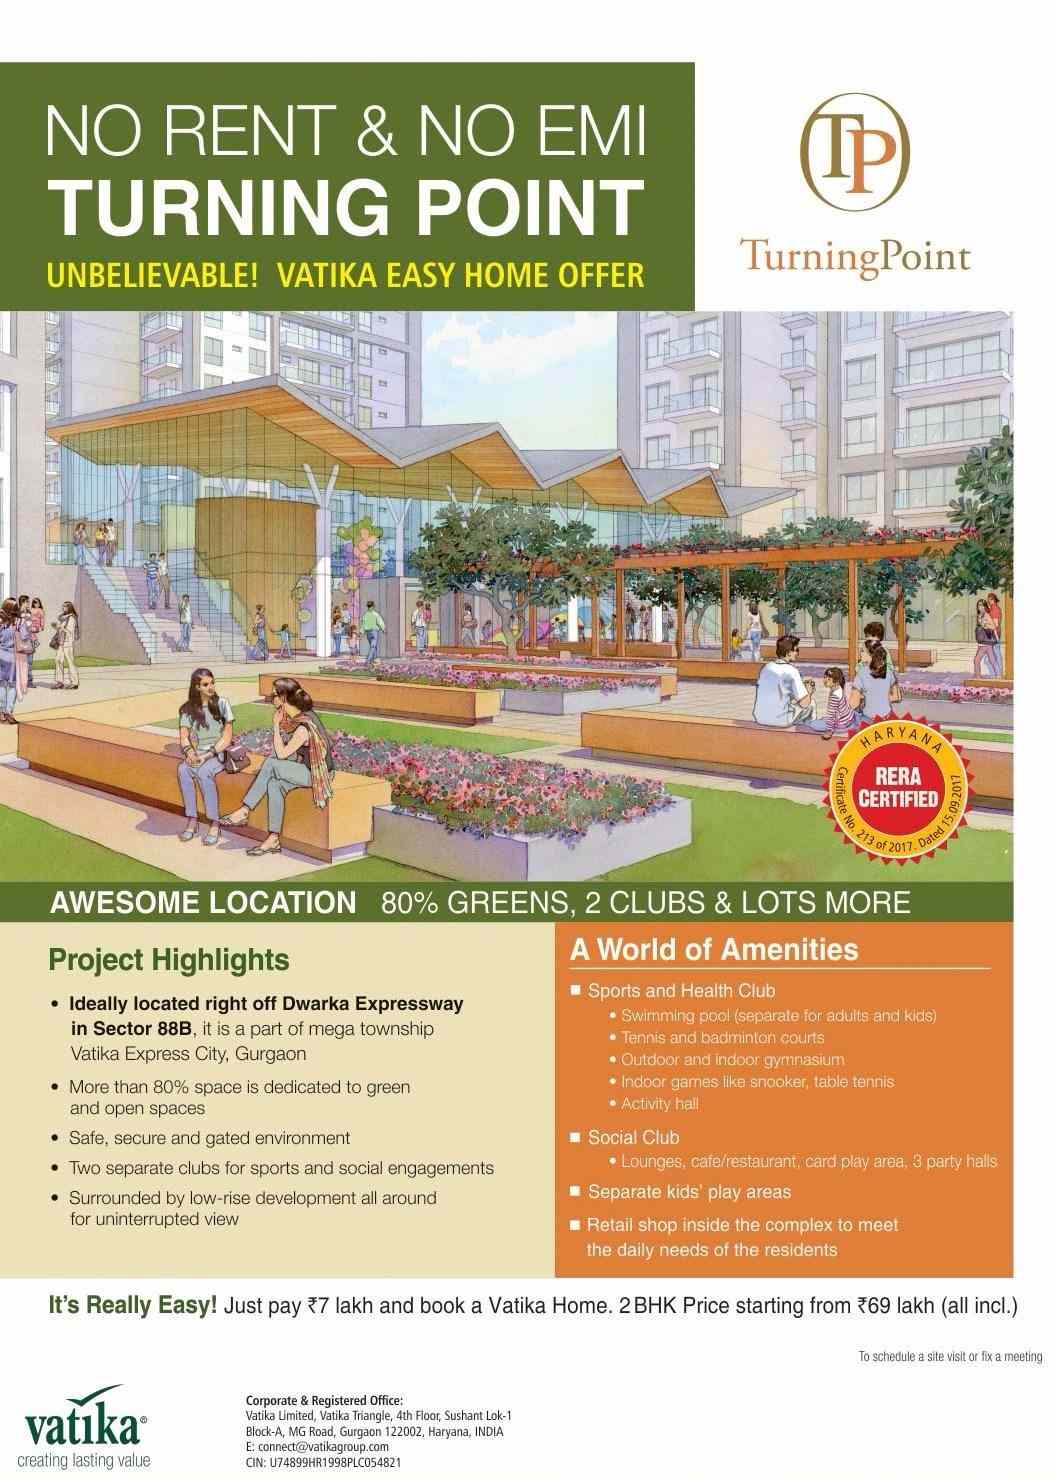 Avail easy home offer that includes no rent & no EMI at Vatika Turning Point in Gurgaon Update